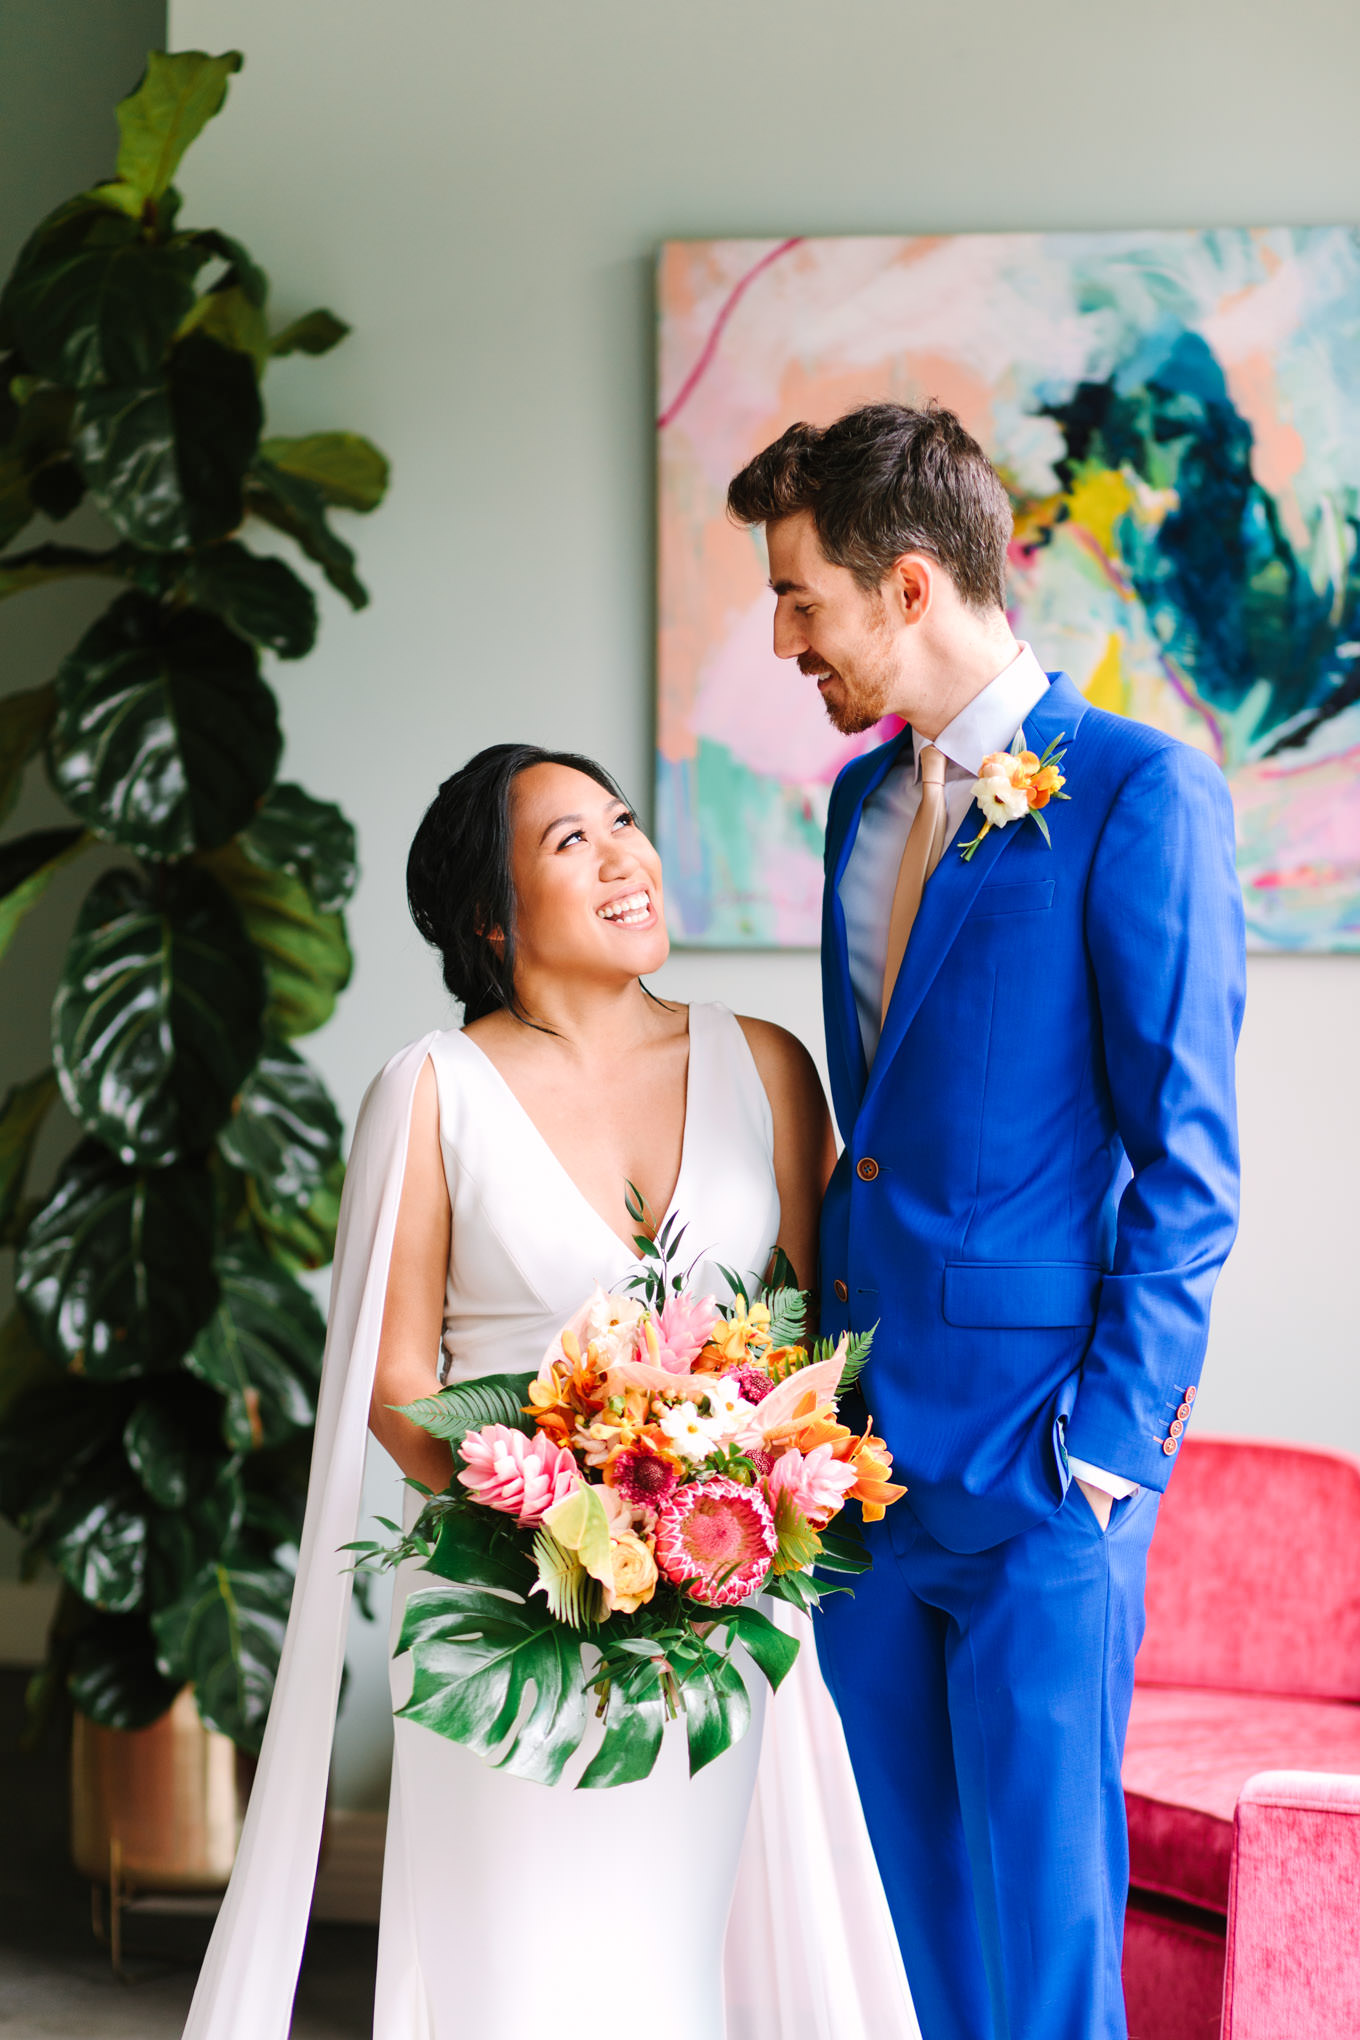 Bride and groom looking at each other | TV inspired wedding at The Fig House Los Angeles | Published on The Knot | Fresh and colorful photography for fun-loving couples in Southern California | #losangeleswedding #TVwedding #colorfulwedding #theknot   Source: Mary Costa Photography | Los Angeles wedding photographer